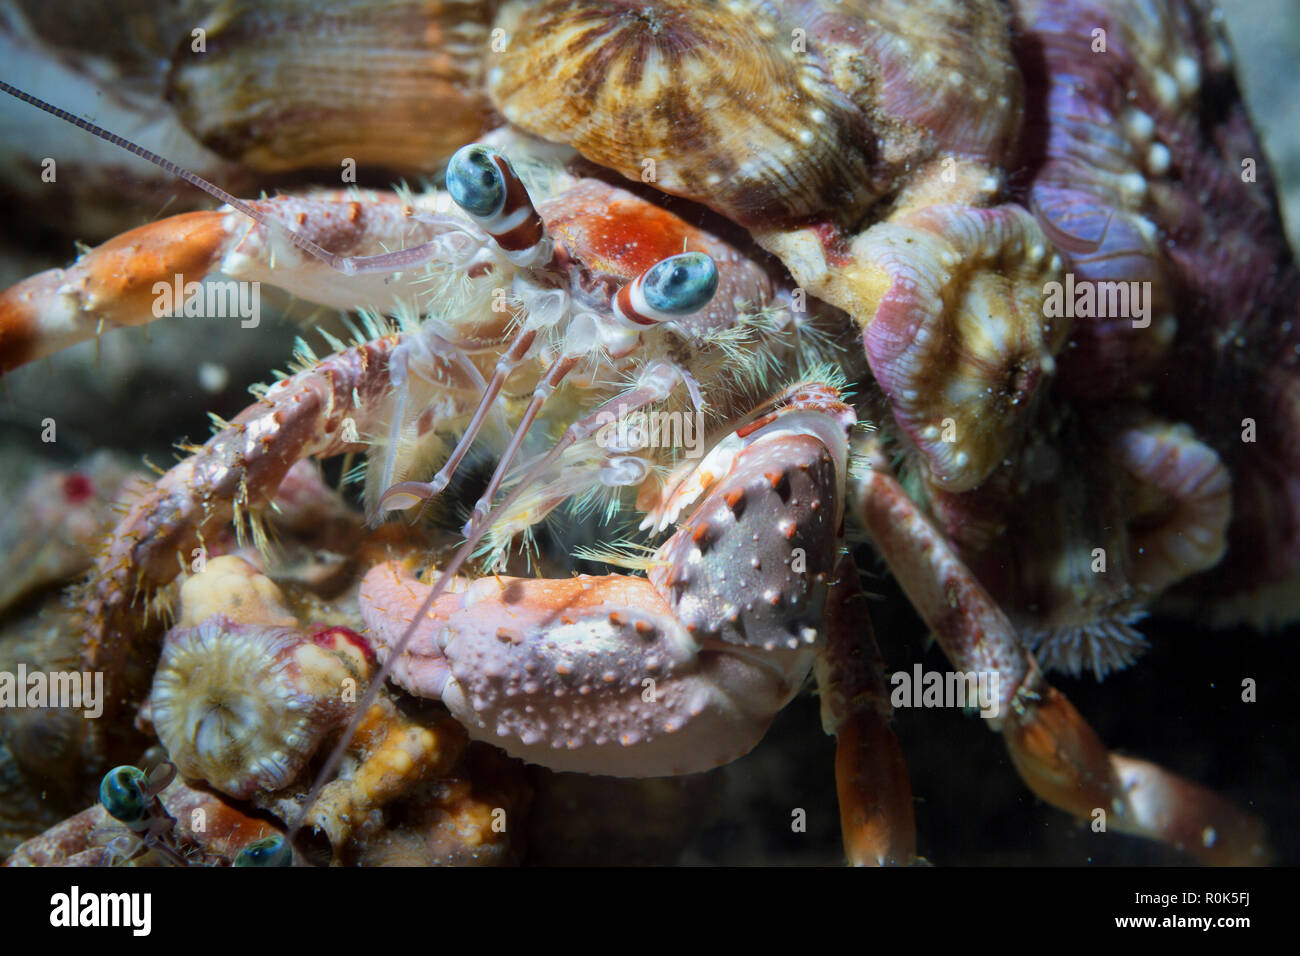 Close-up of a hermit crab, Philippines. Stock Photo